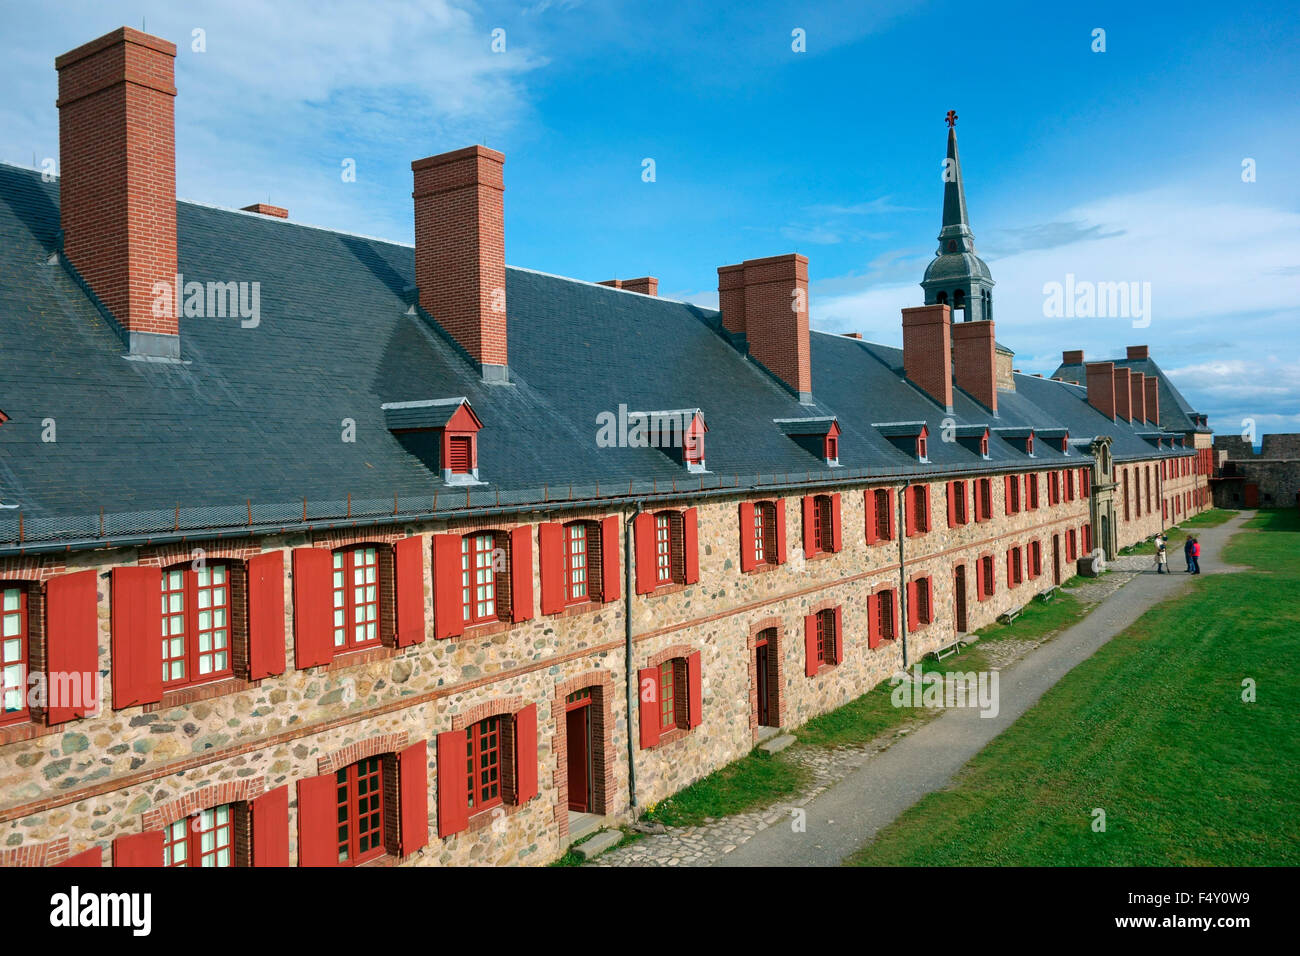 Building housing the Governor's Apartments and the King's Bastion Barracks in The Fortress of Louisbourg, Cape Breton, Canada Stock Photo